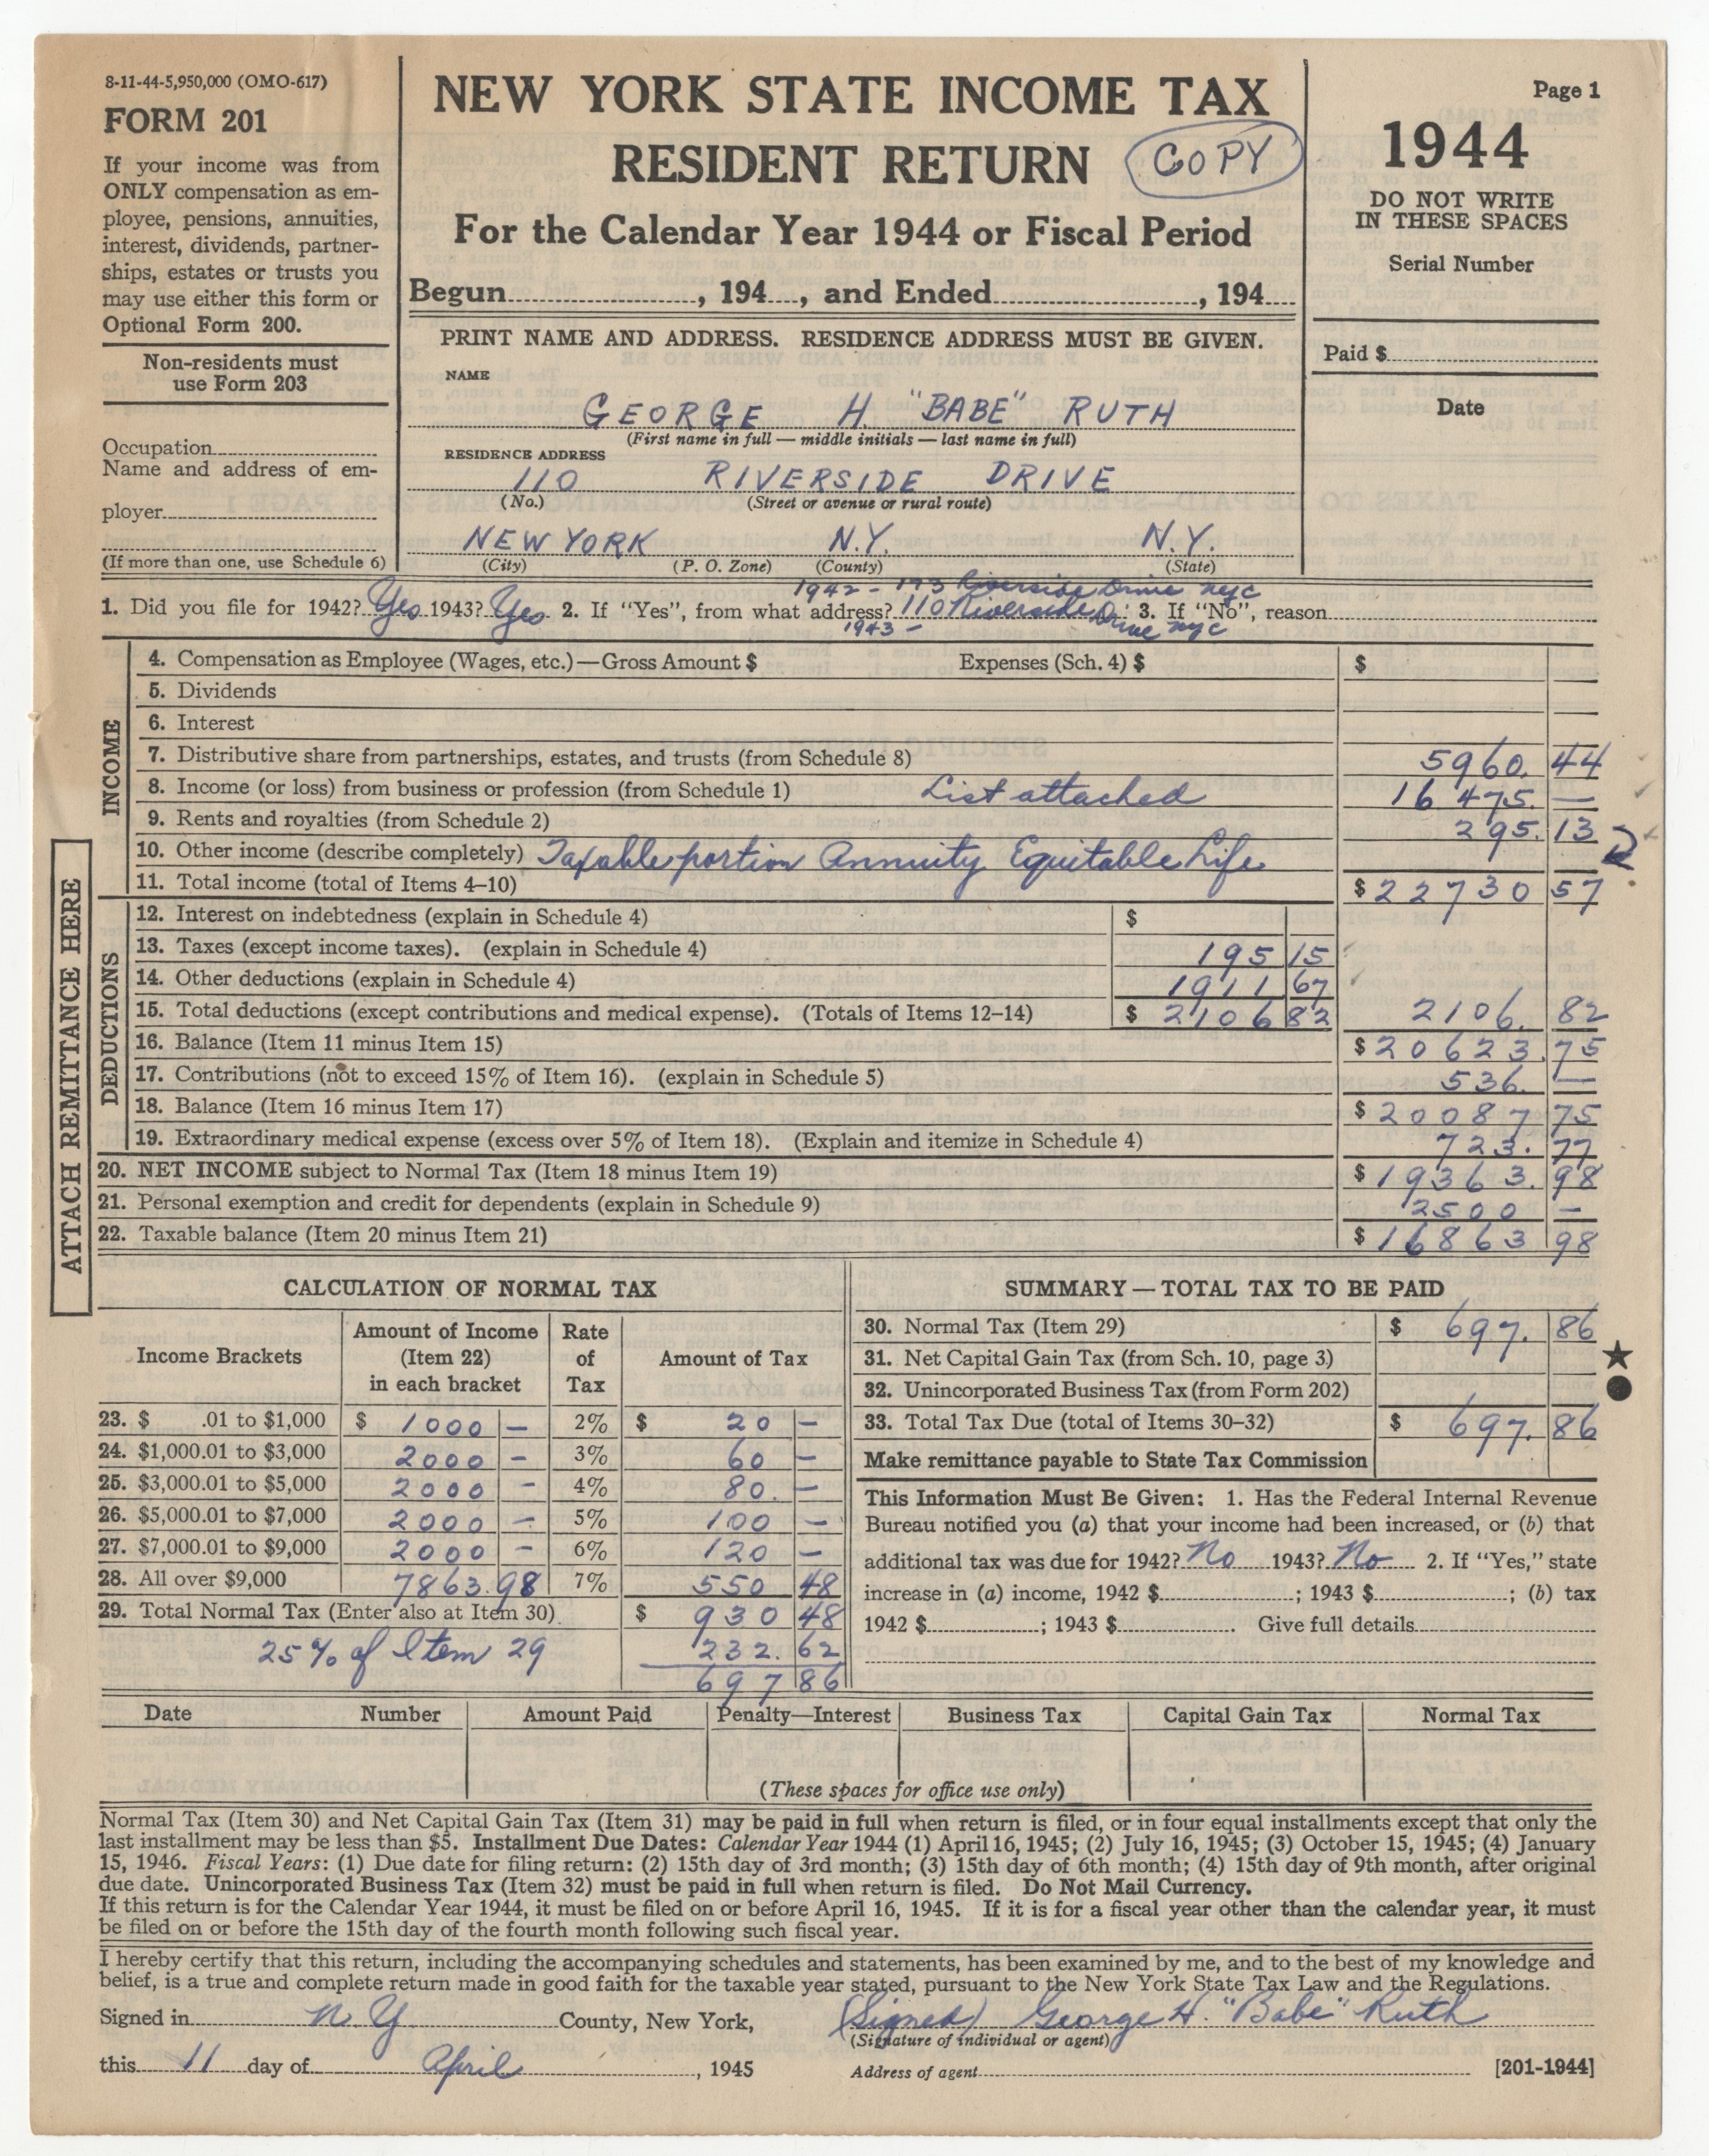 Ruth and Gehrig - 1944 Babe Ruth NY State Income Tax Return (Ghost Signed)